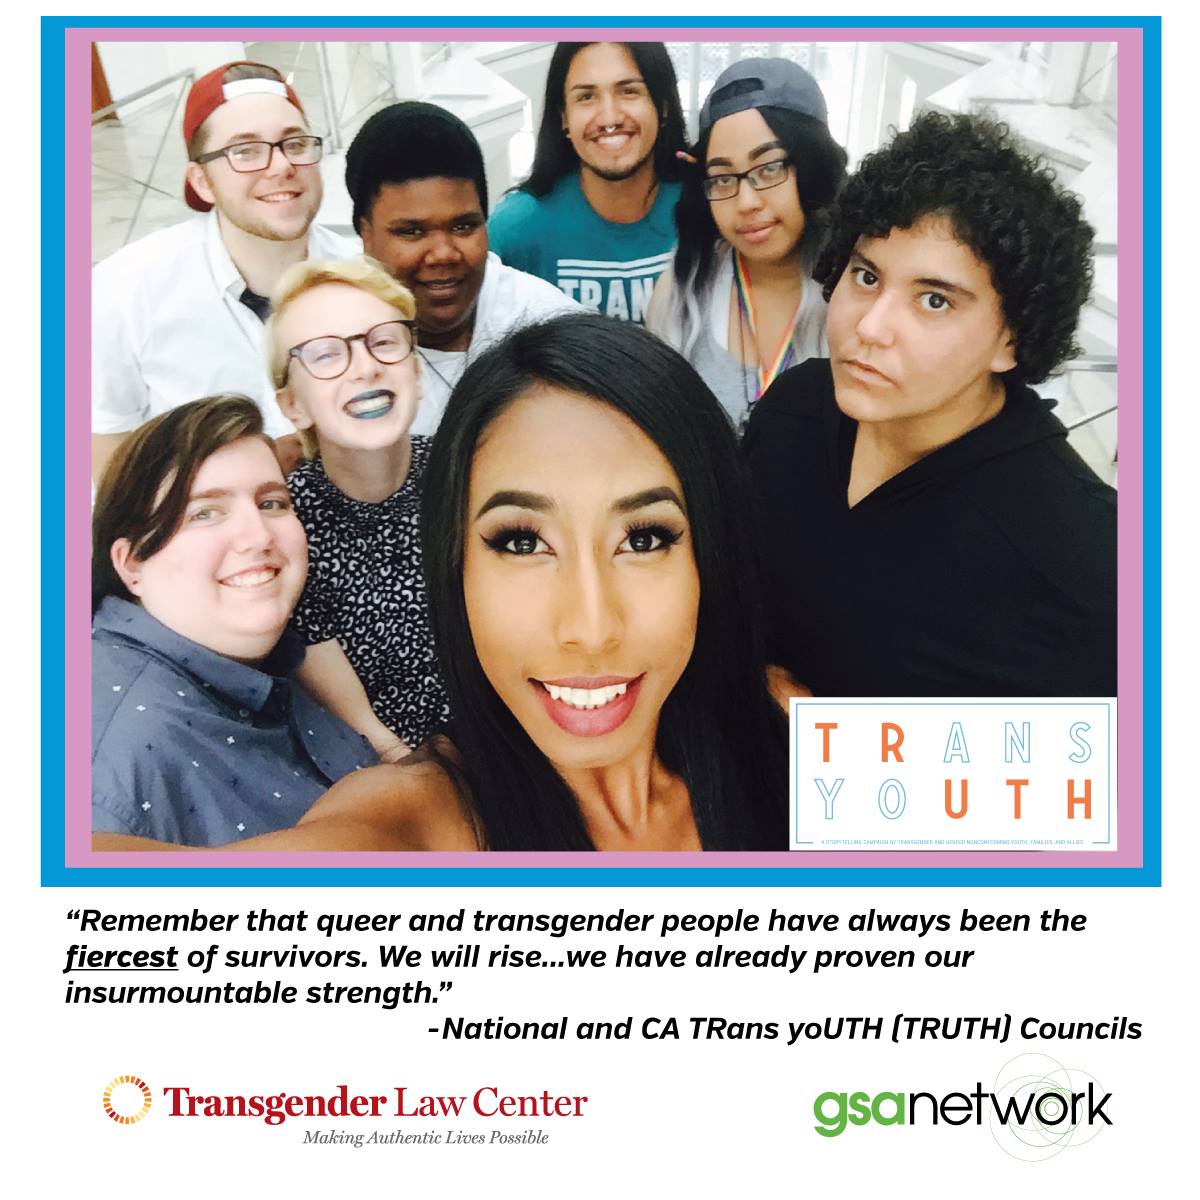 TRUTH youth council statement on Orlando